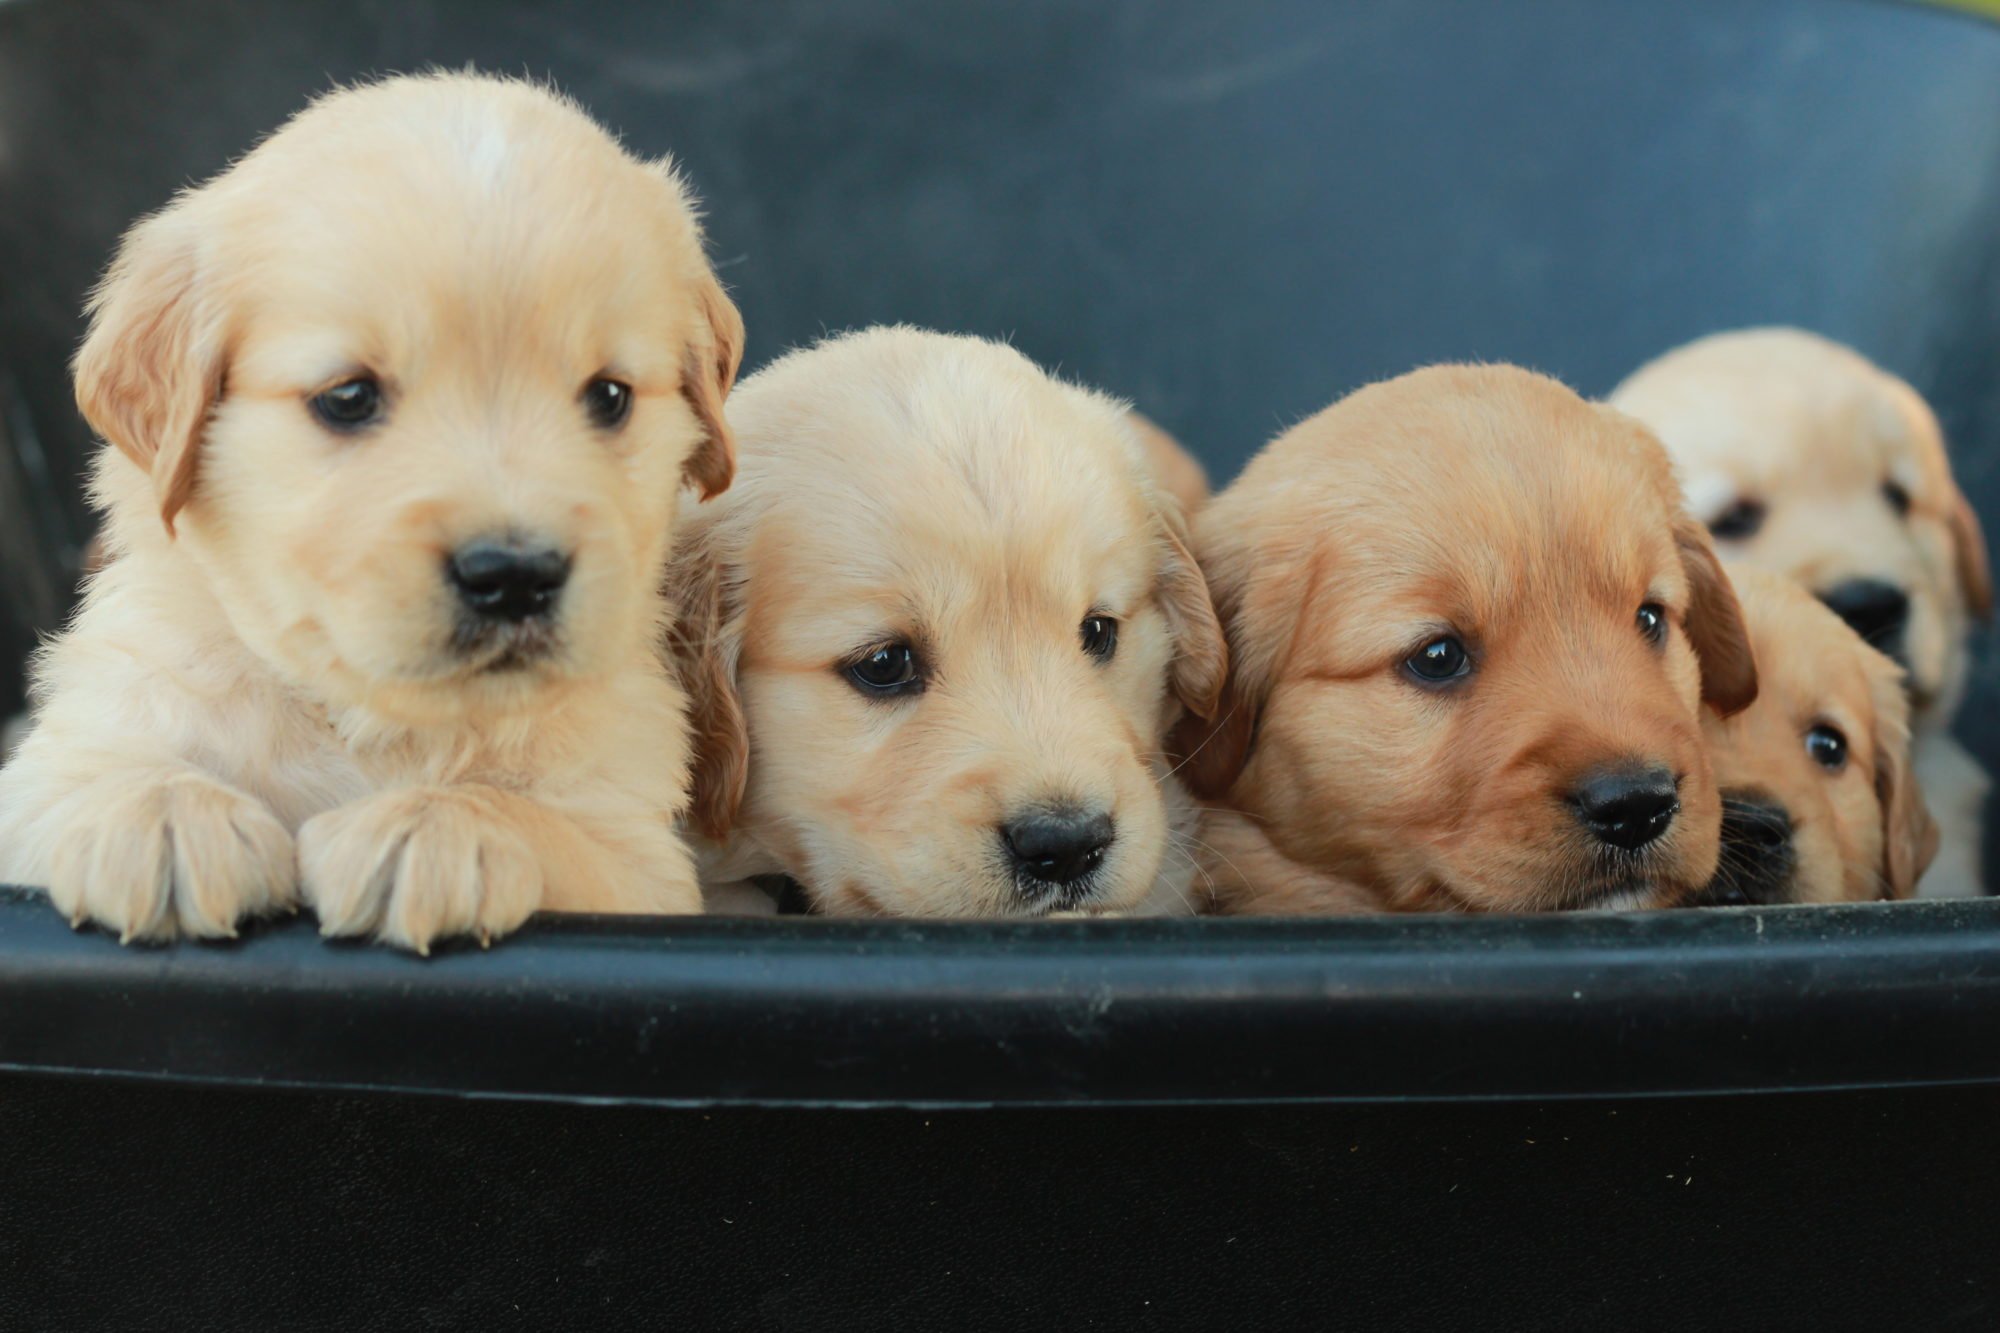 Reserve your golden retriever puppy from Windy Knoll ...